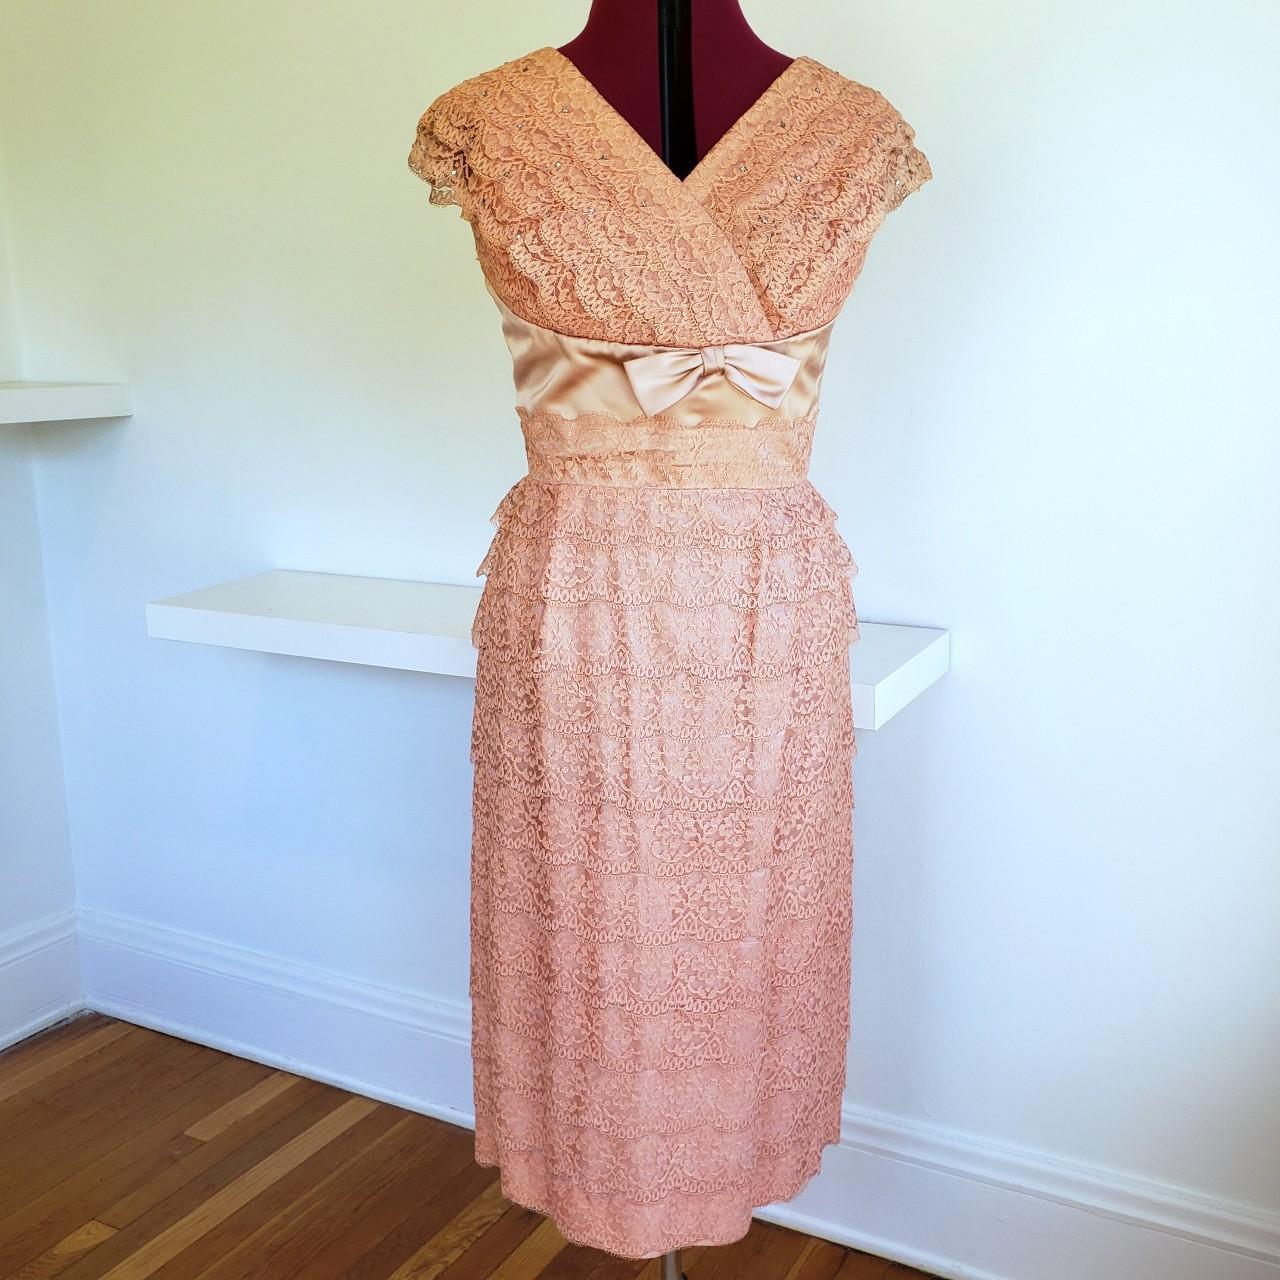 American Vintage Women's Tan and Pink Dress